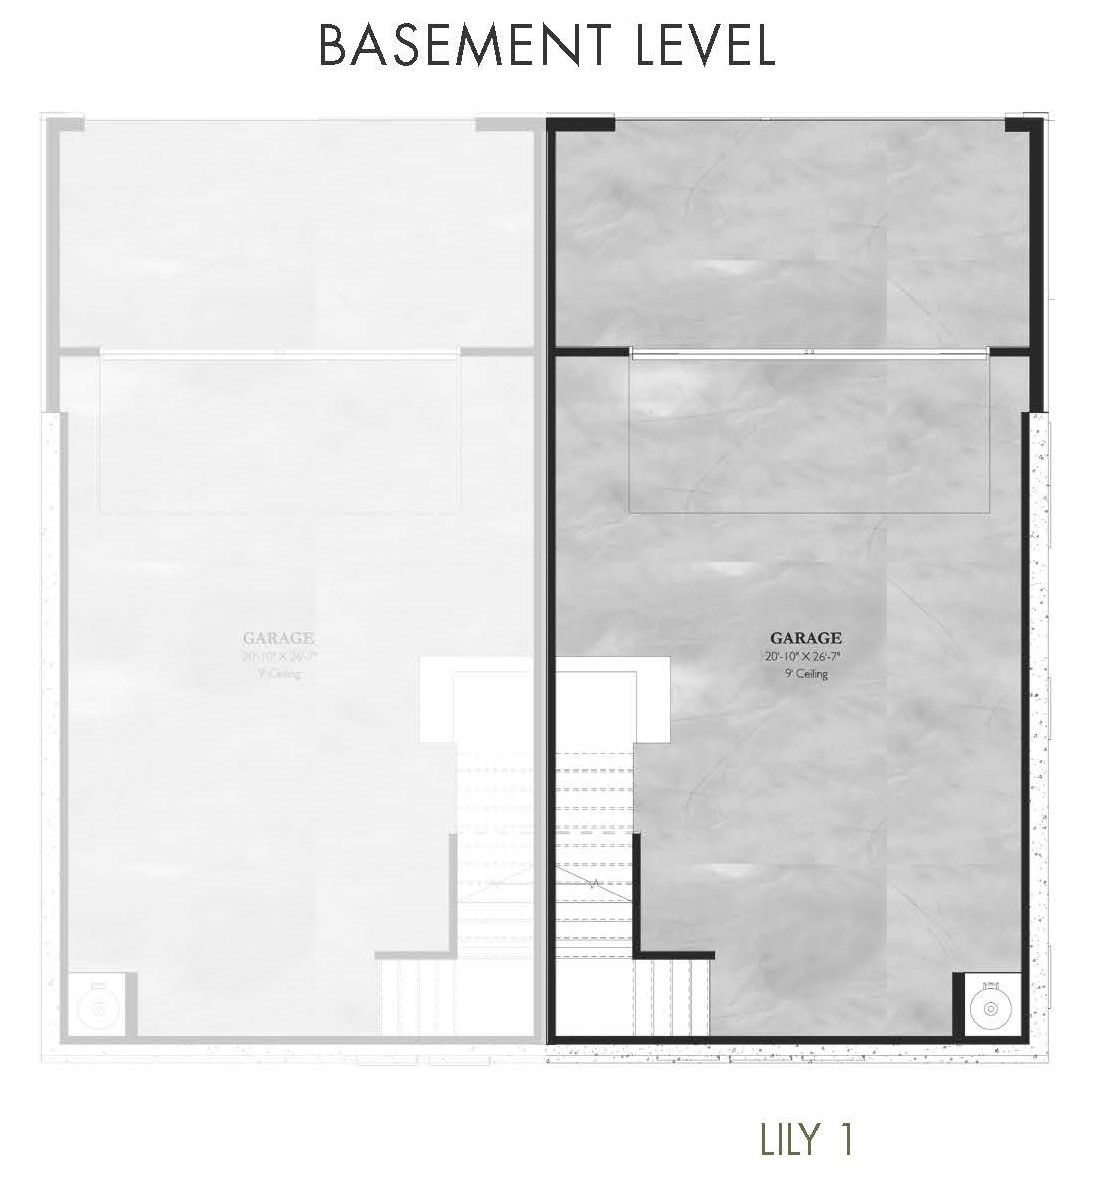 The Lily 1- Home Site 5061Basement Level